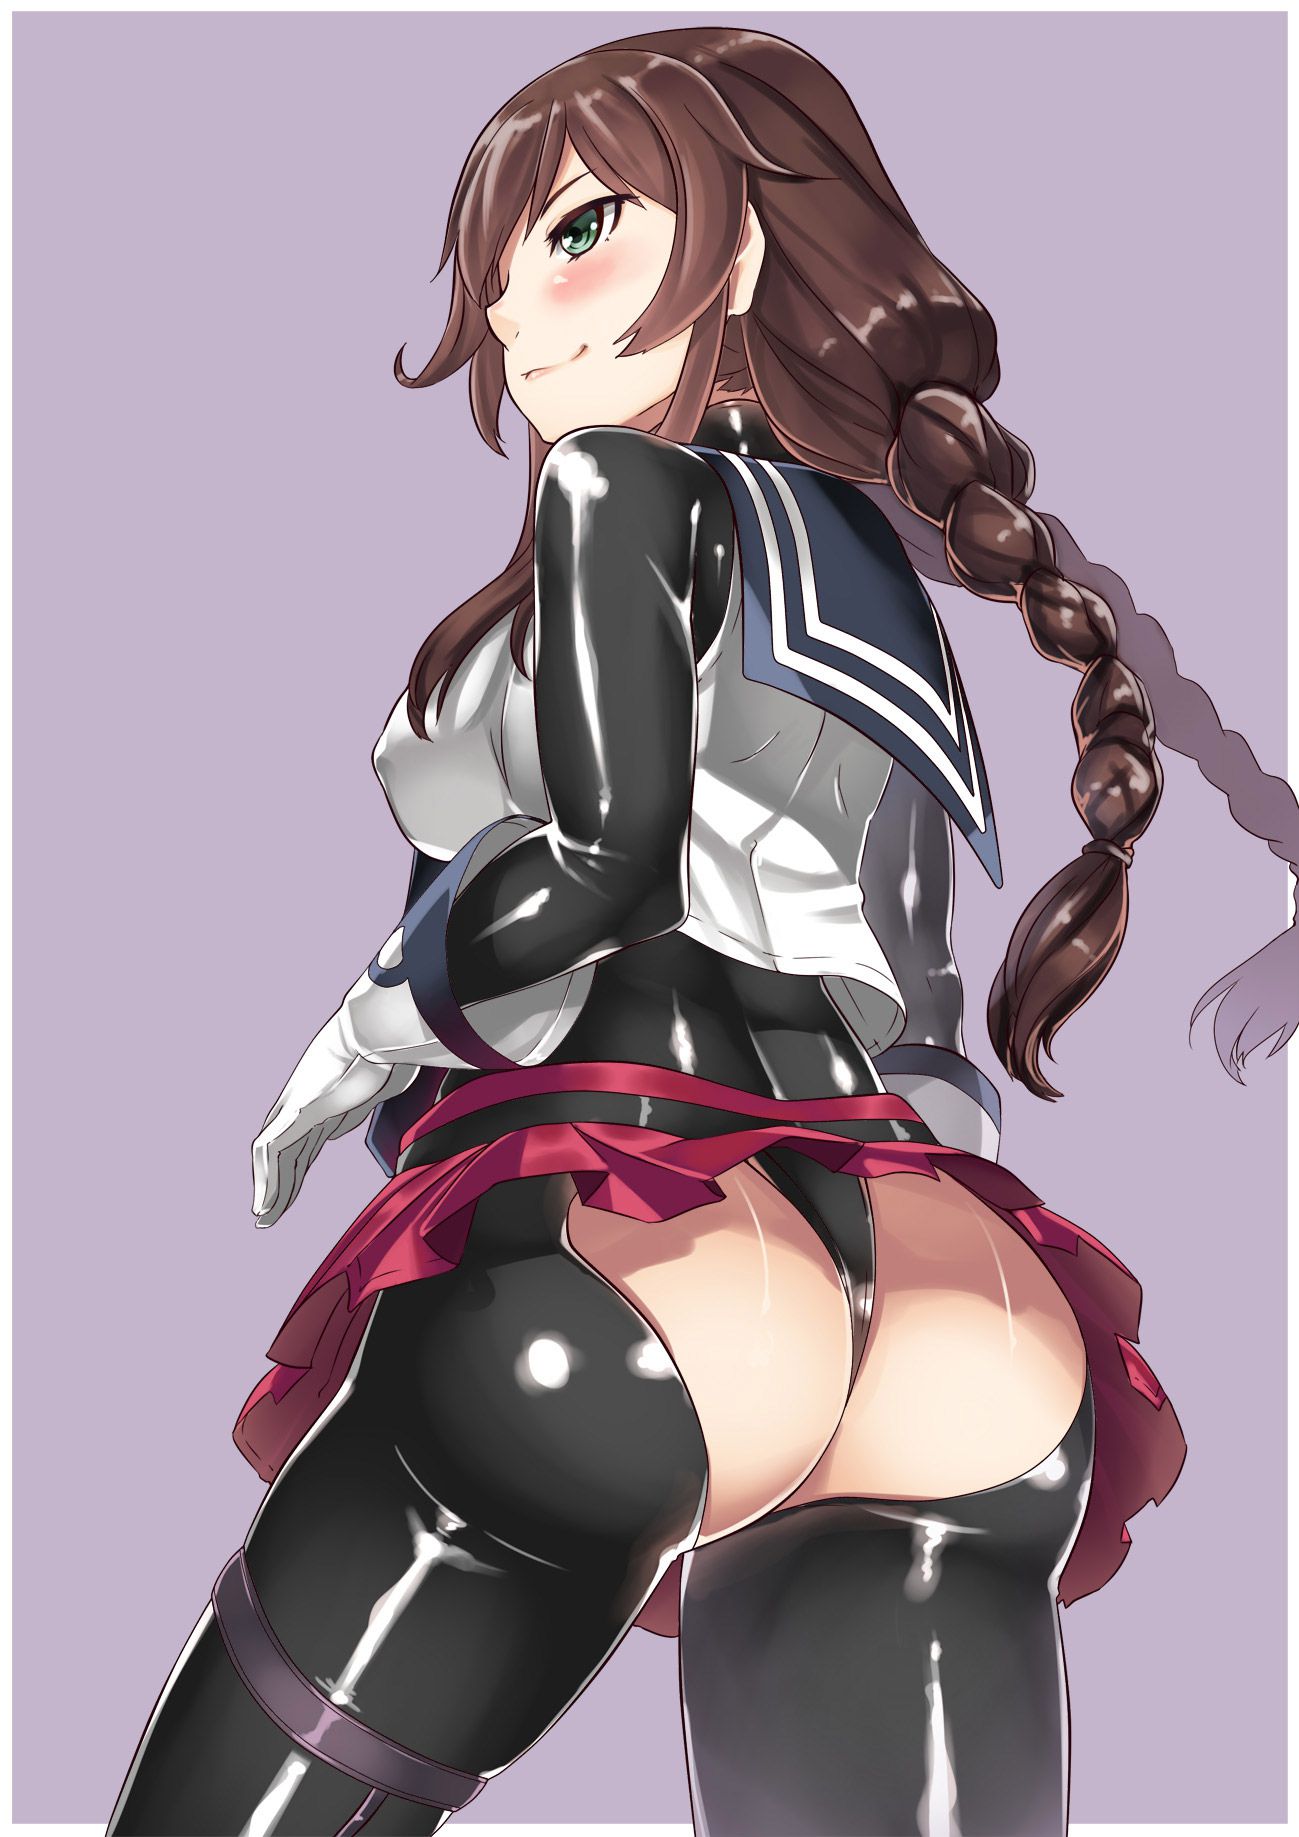 42 erotic images to Ascension, sandwiched between 2-d girl's ass 29